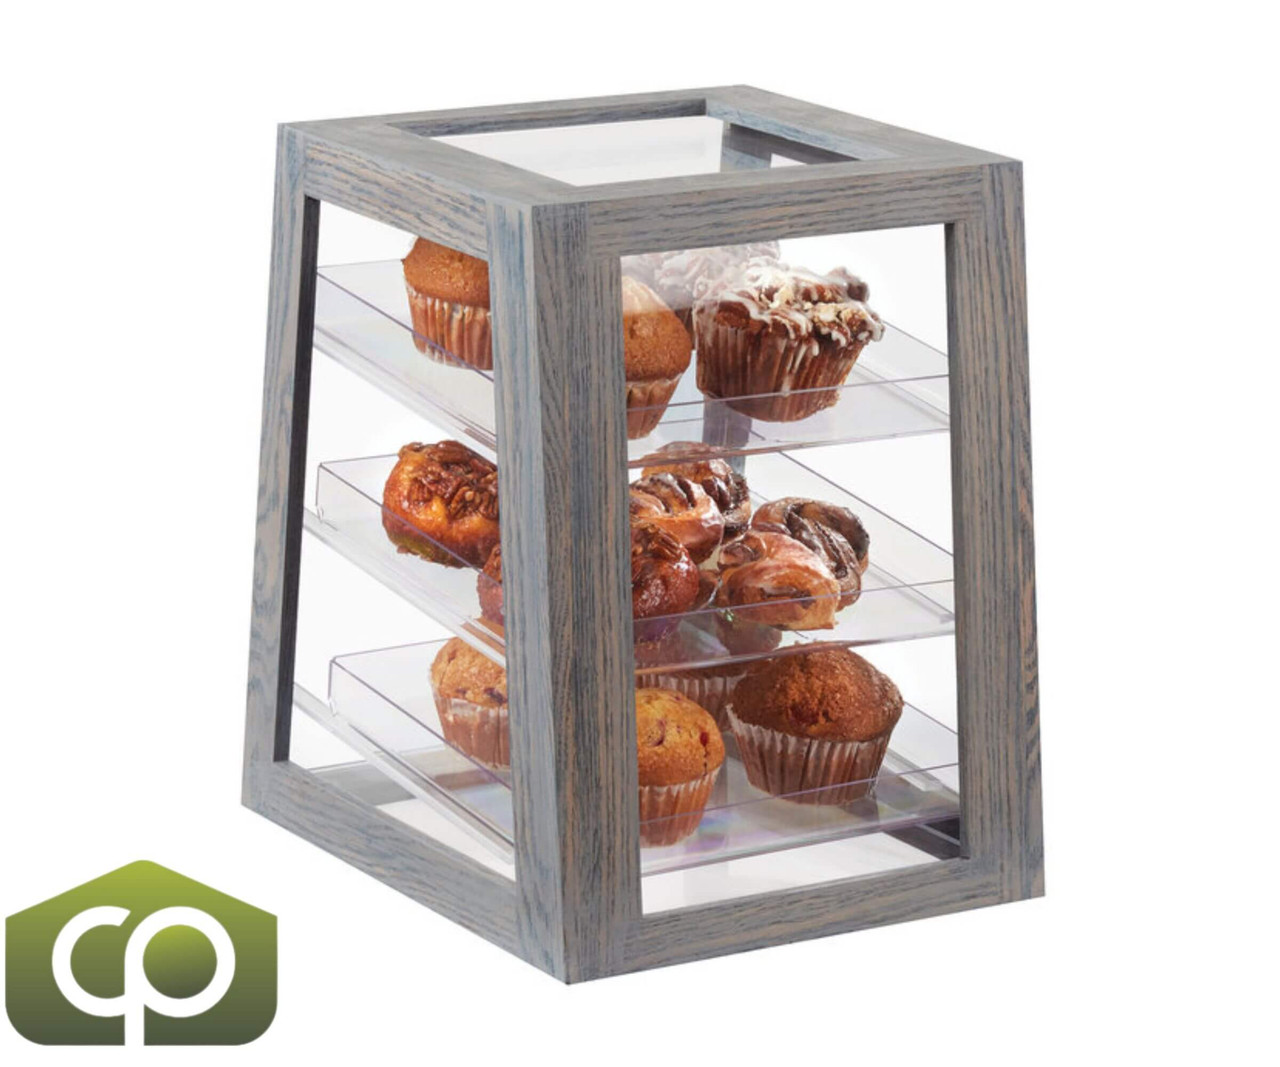 Cal-Mil Ashwood 13 1/2" x 11 1/4" x 15" Gray Oak 3-Tier Tray Display Case-Chicken Pieces